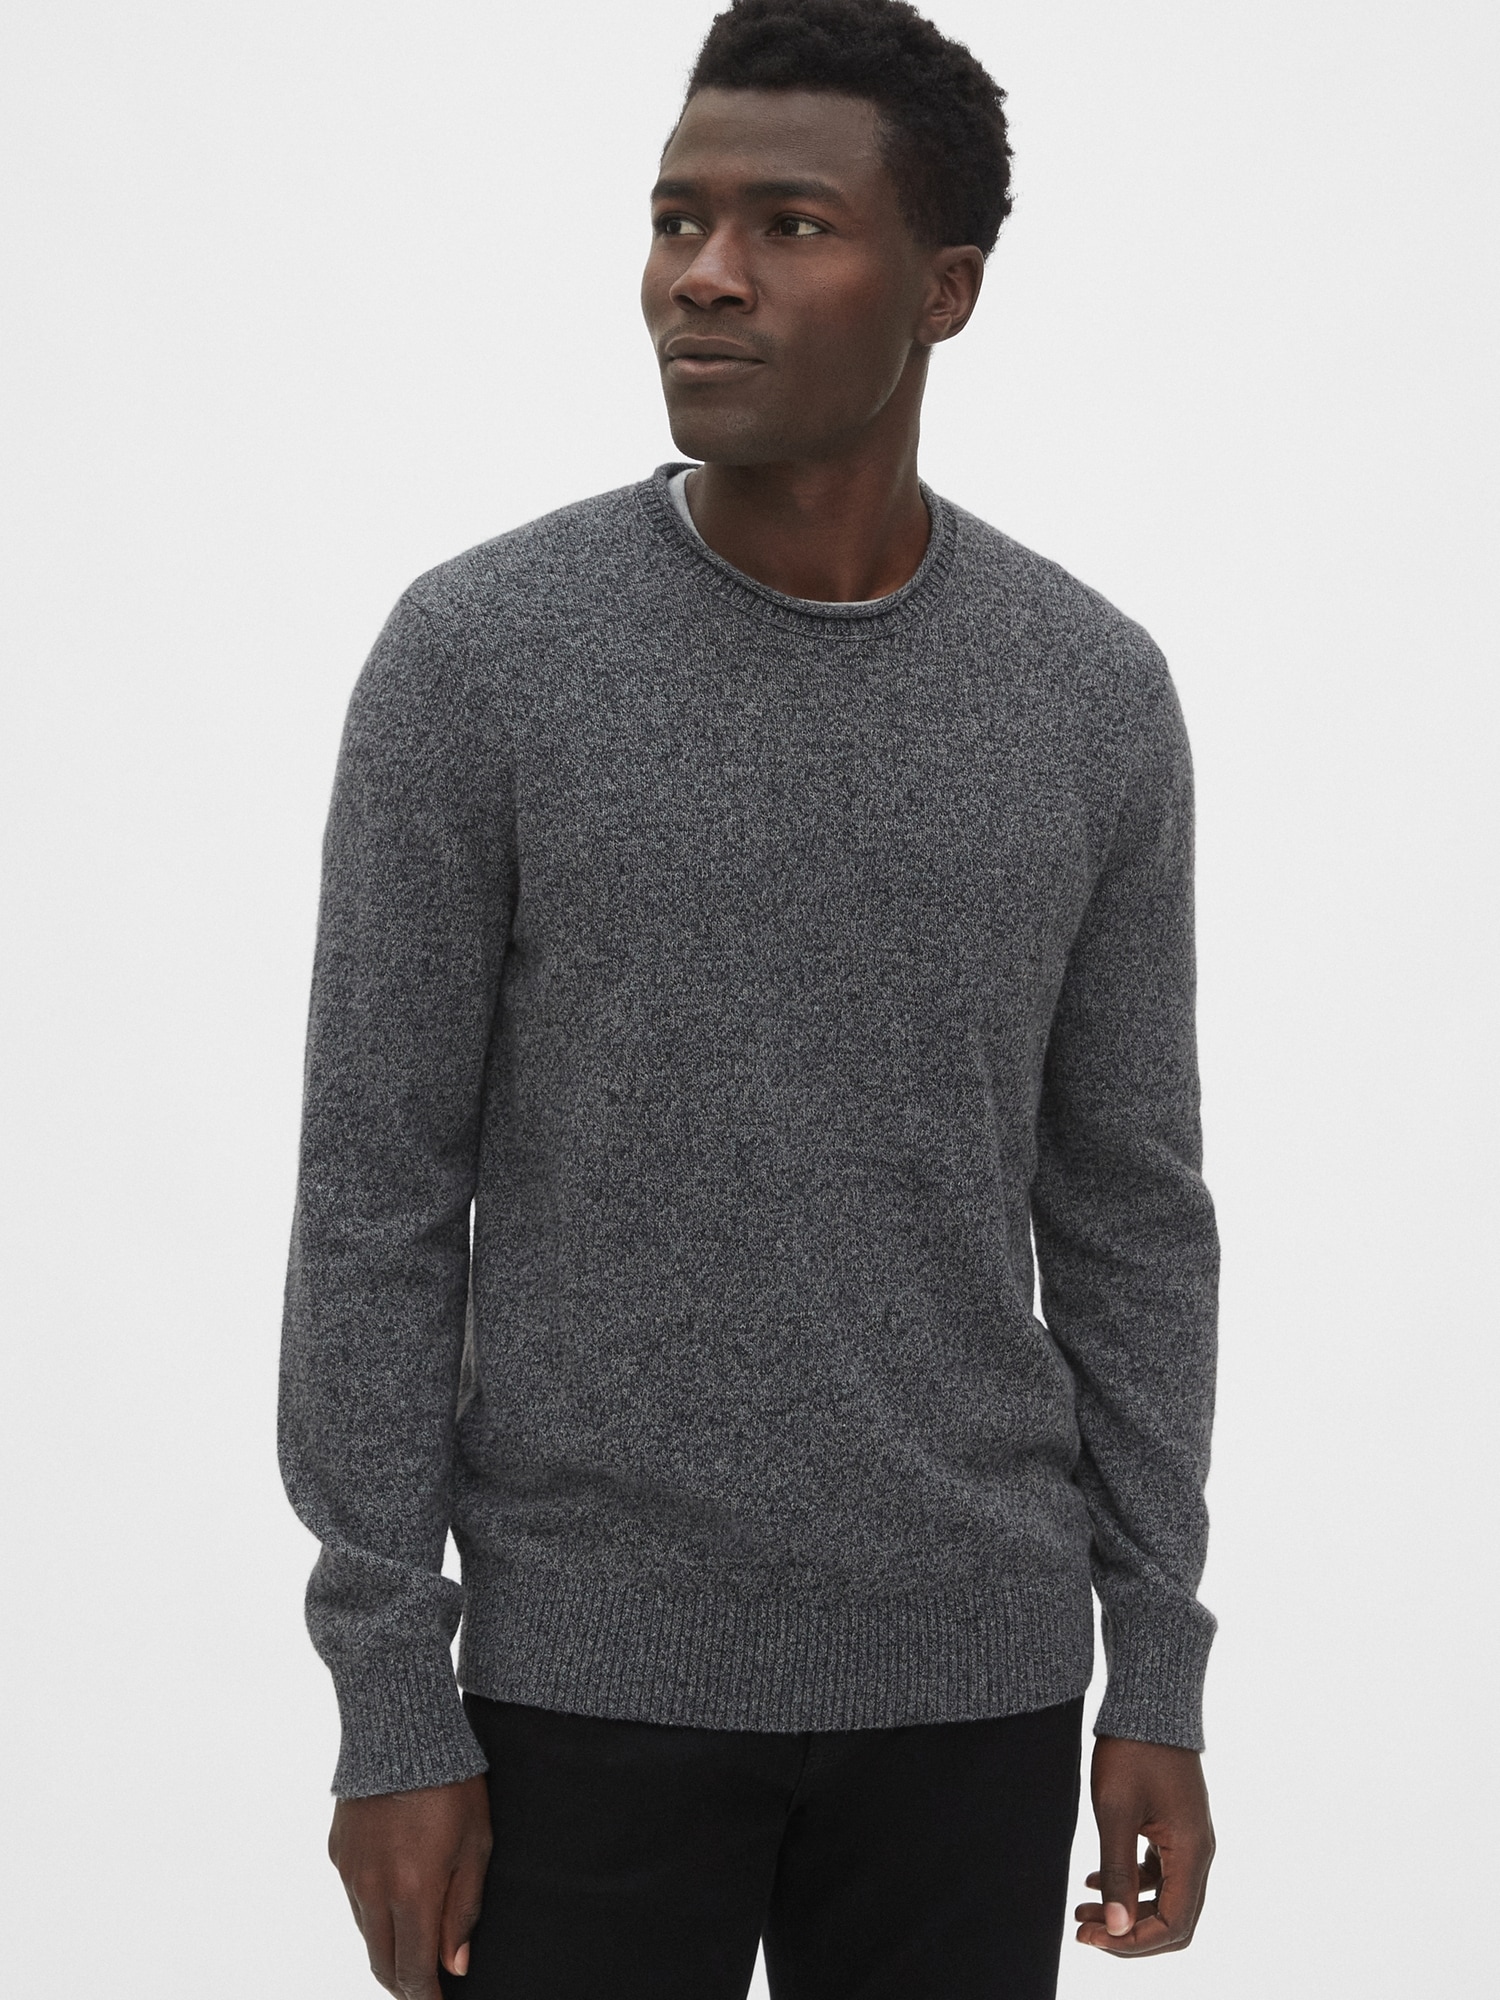 COS - The oversized roll-neck: a style designed for comfort in a tactile  wool blend, finished in light lilac..   Shop men's knitwear:  Find your nearest store